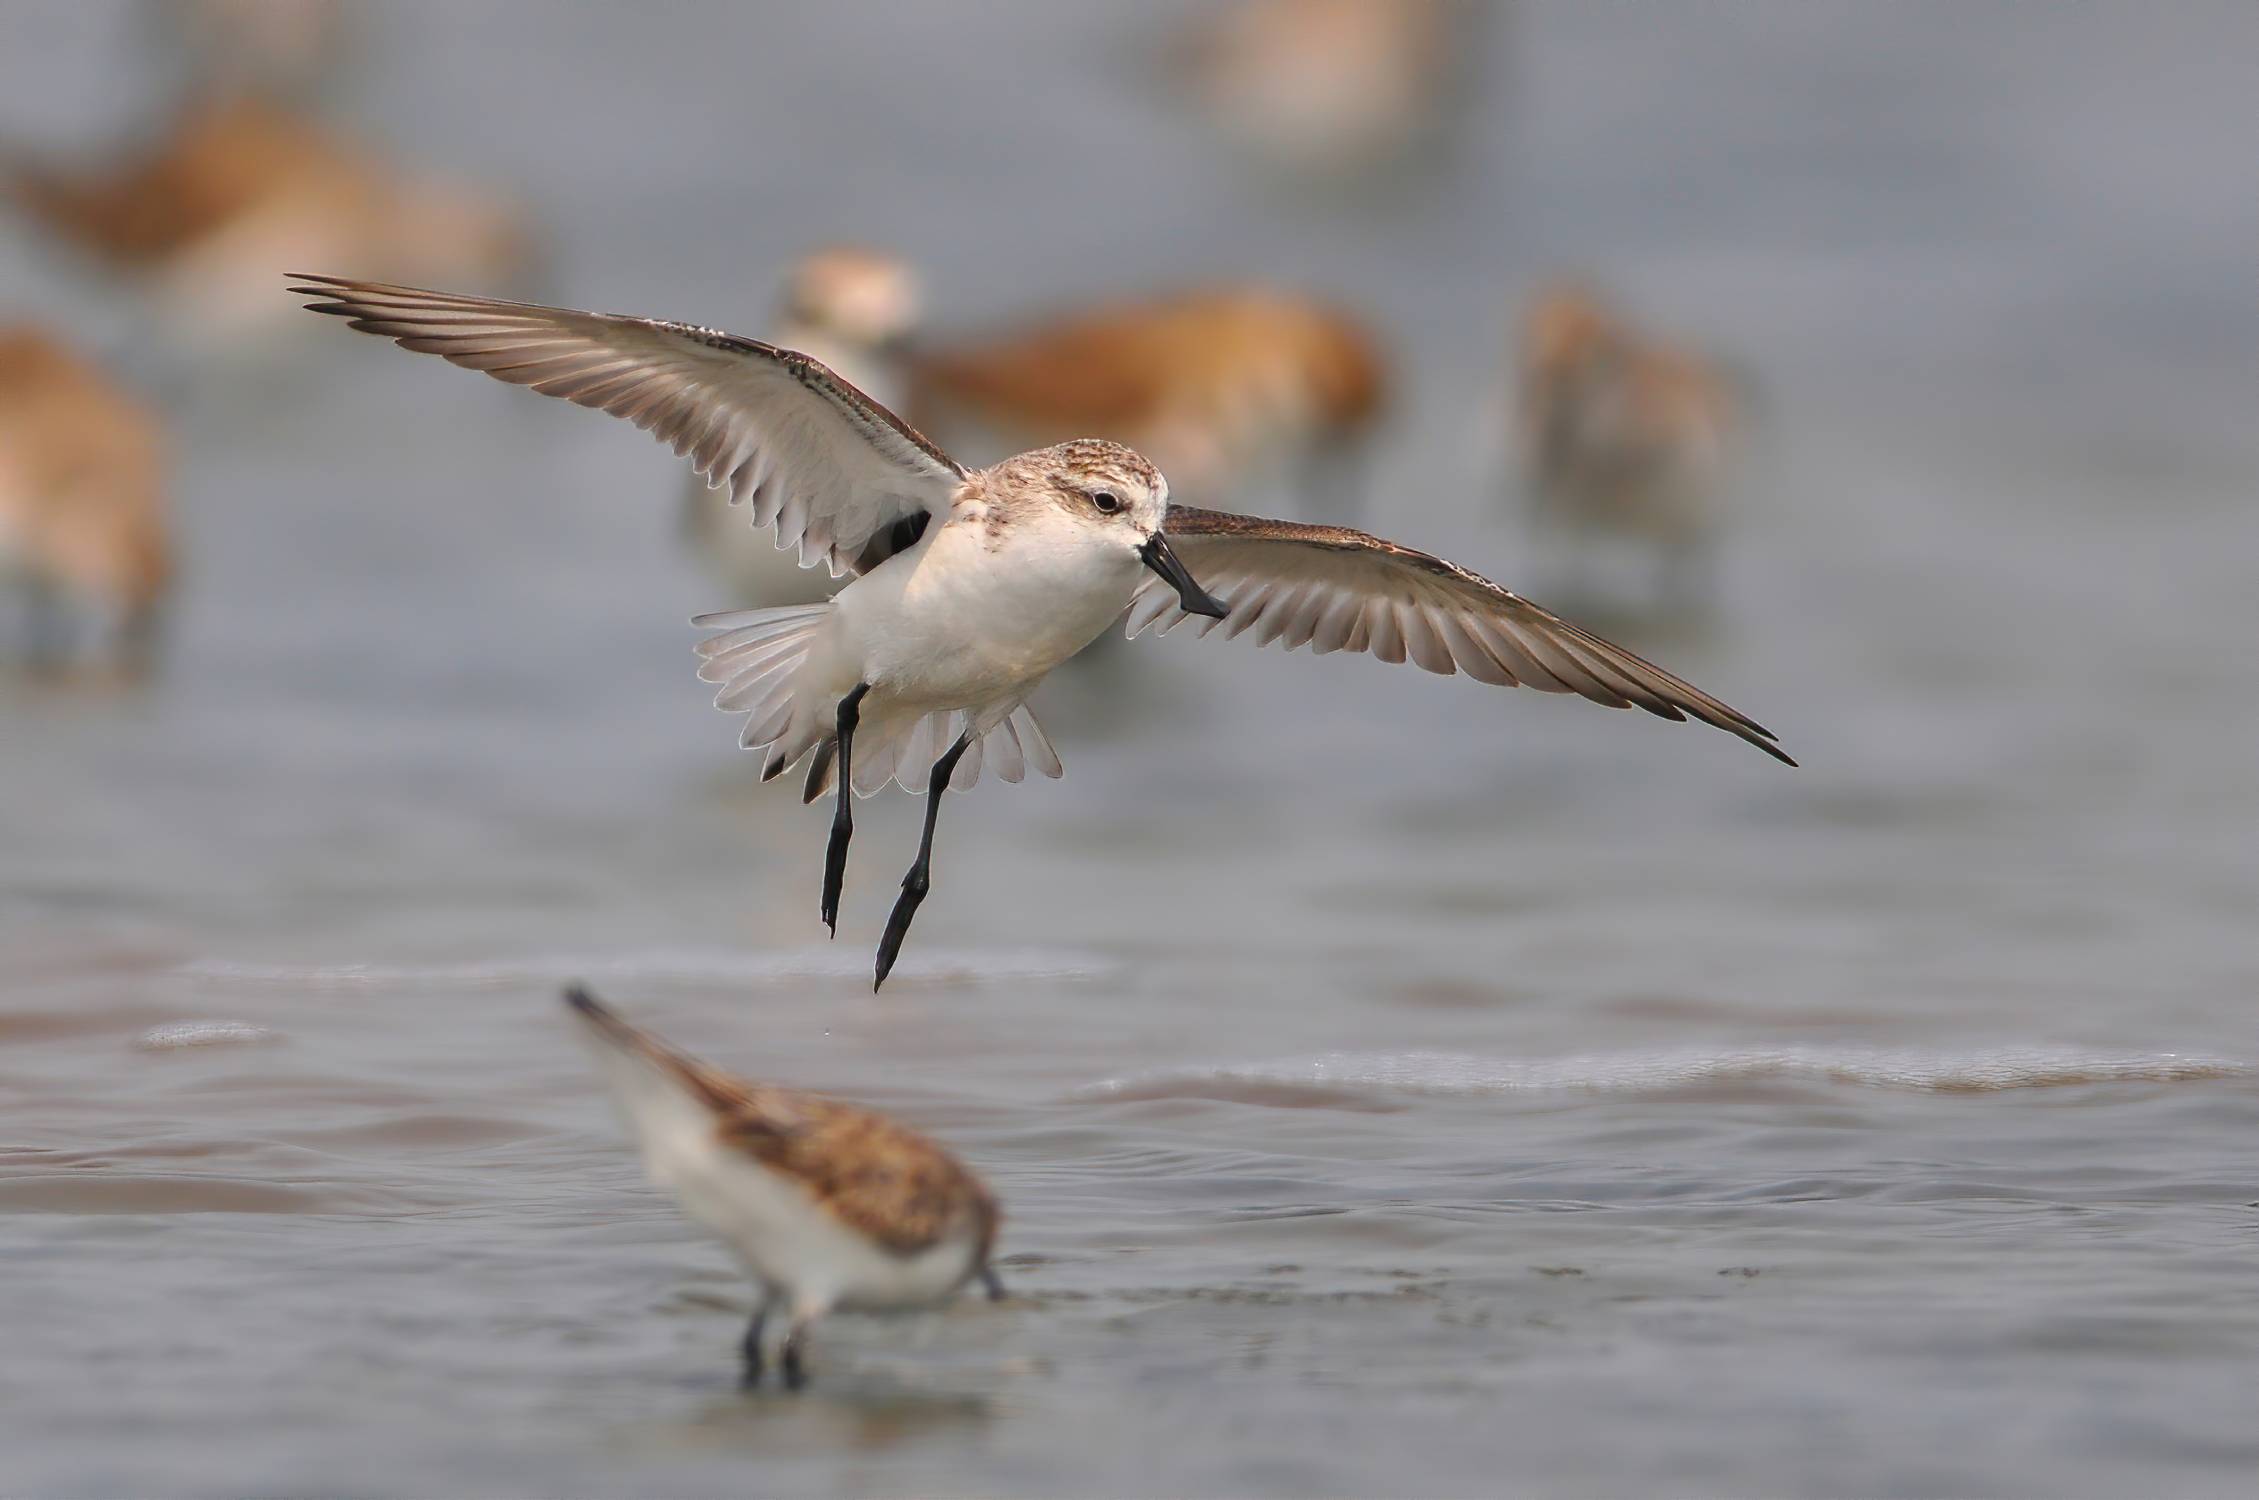 Spoon-billed sandpiper flying, one of the most rare and endangered birds. Photo ID 189612398 © Chamnan Phanthong | Dreamstime.com